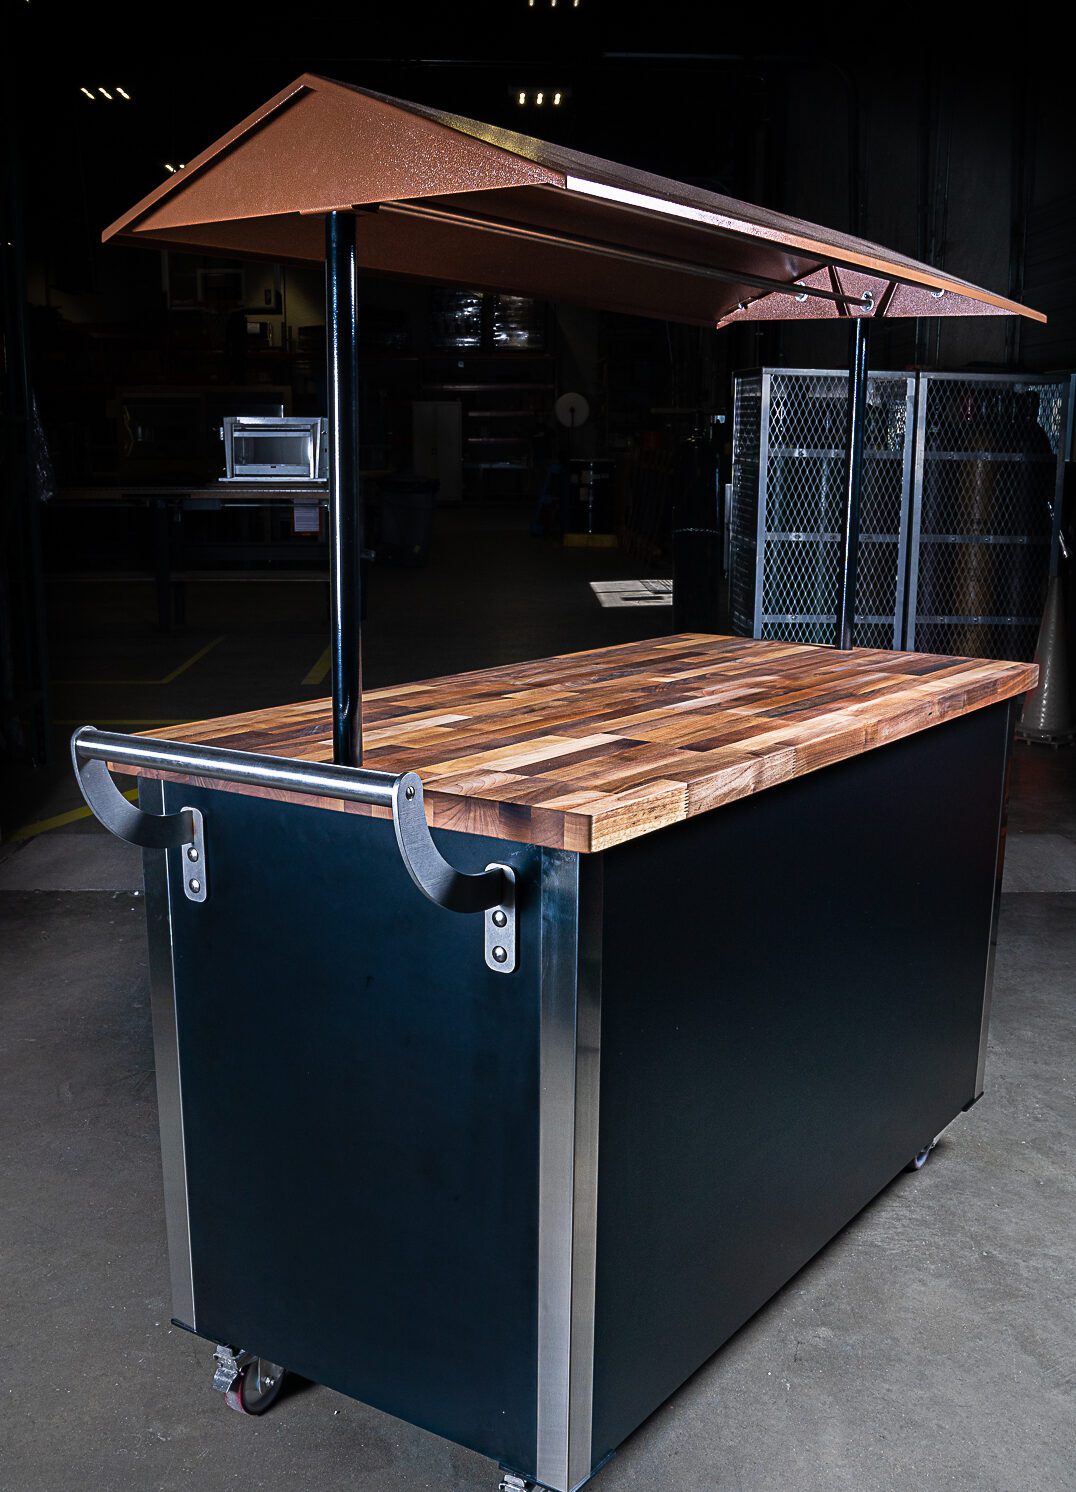 FirstBuild Launches Arden, A First-of-Its-Kind Indoor Barbeque Smoker